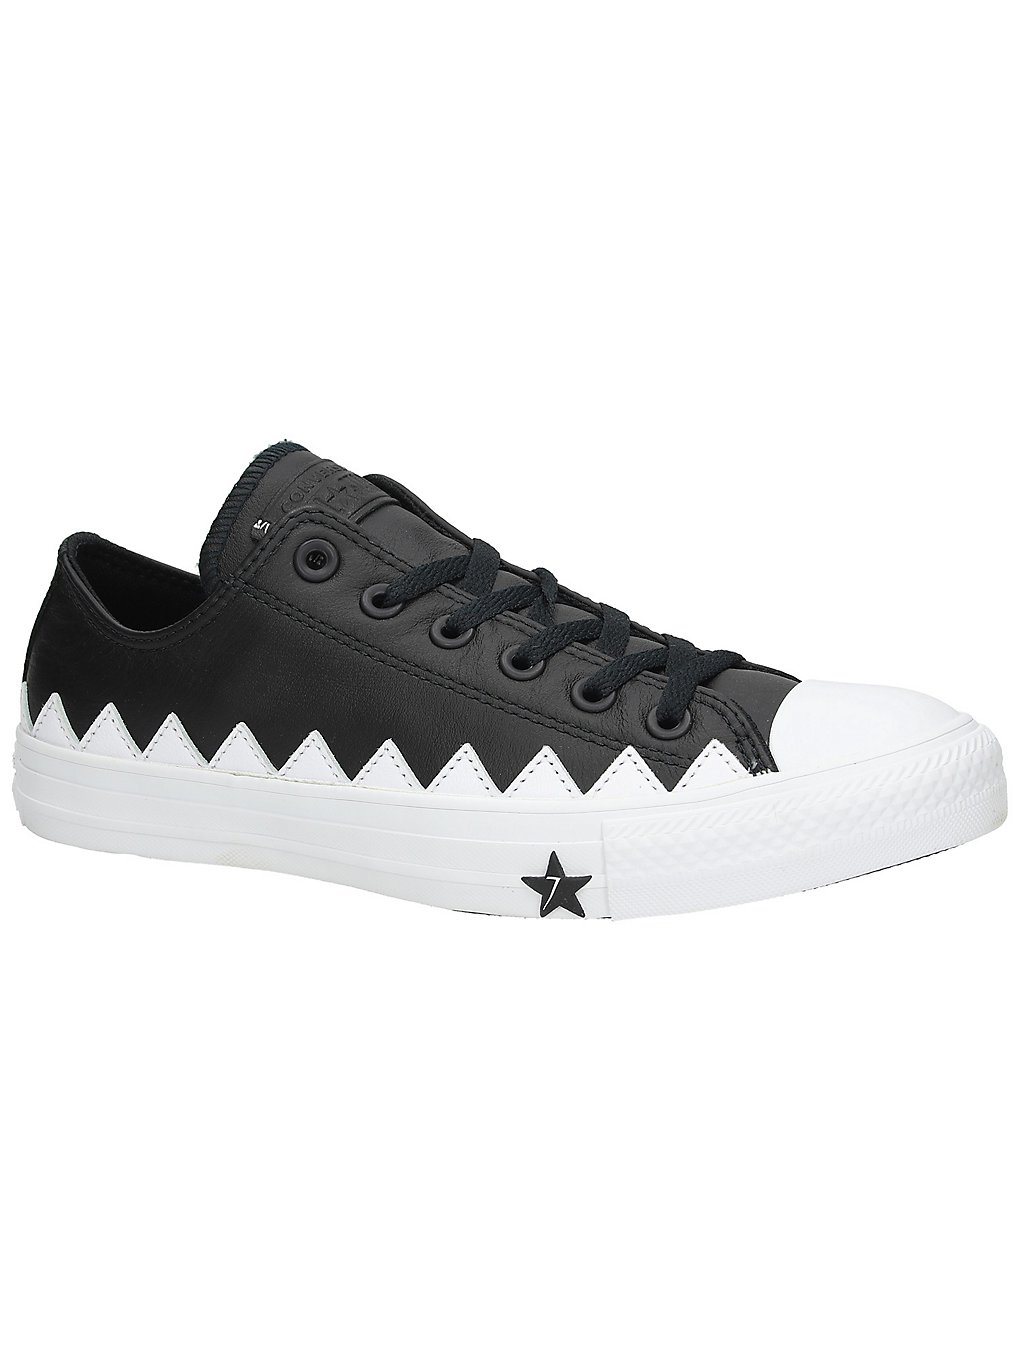 Converse Chuck Taylor All Star Mission-V Sneakers noir